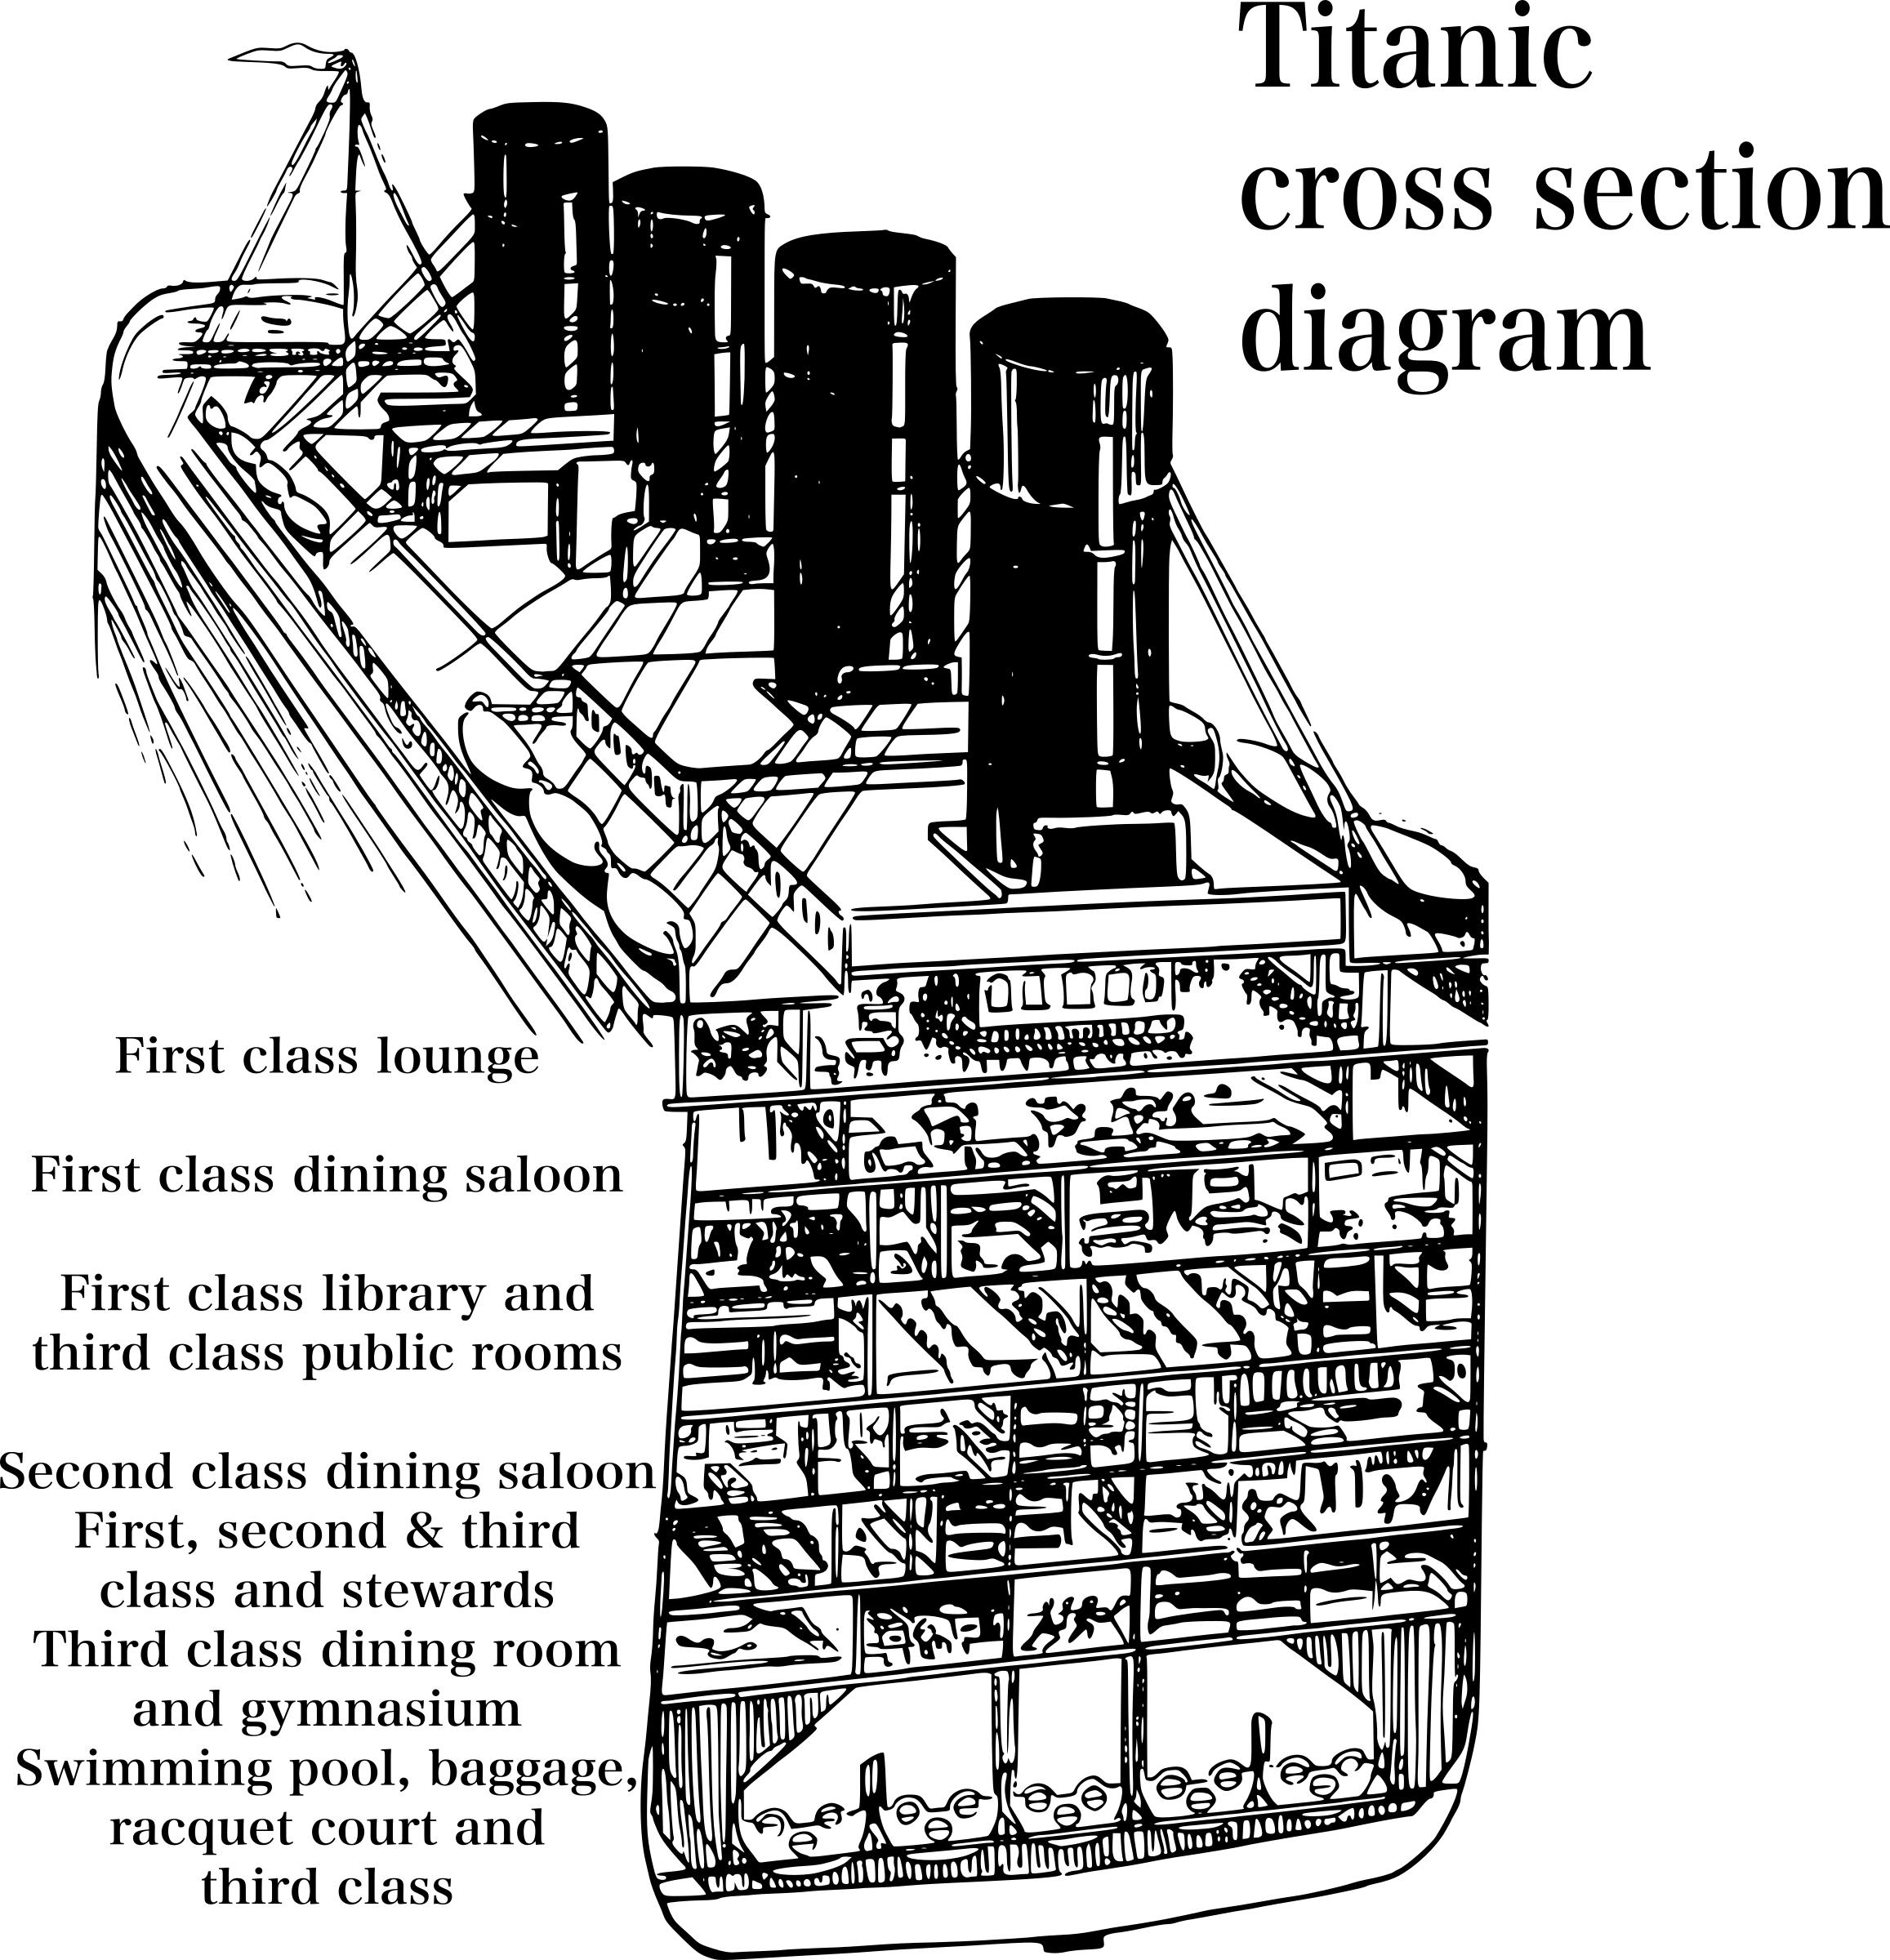 Titanic Cross Section Diagram png